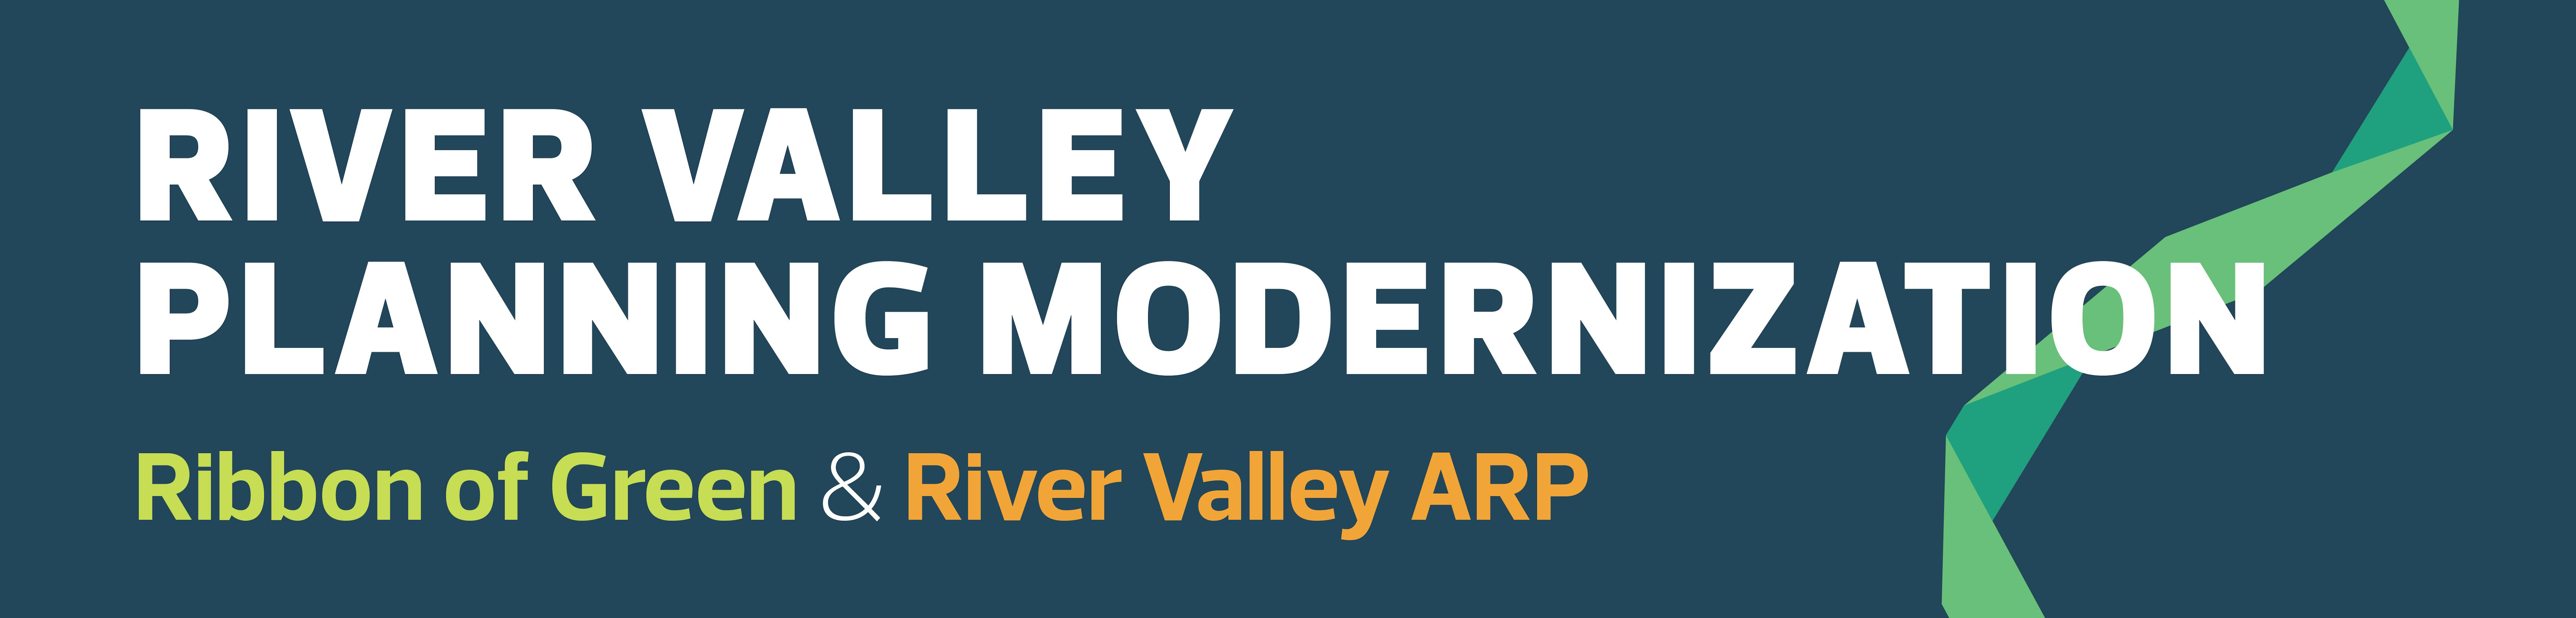 River Valley Planning Modernization, Ribbon of Green and River Valley ARP